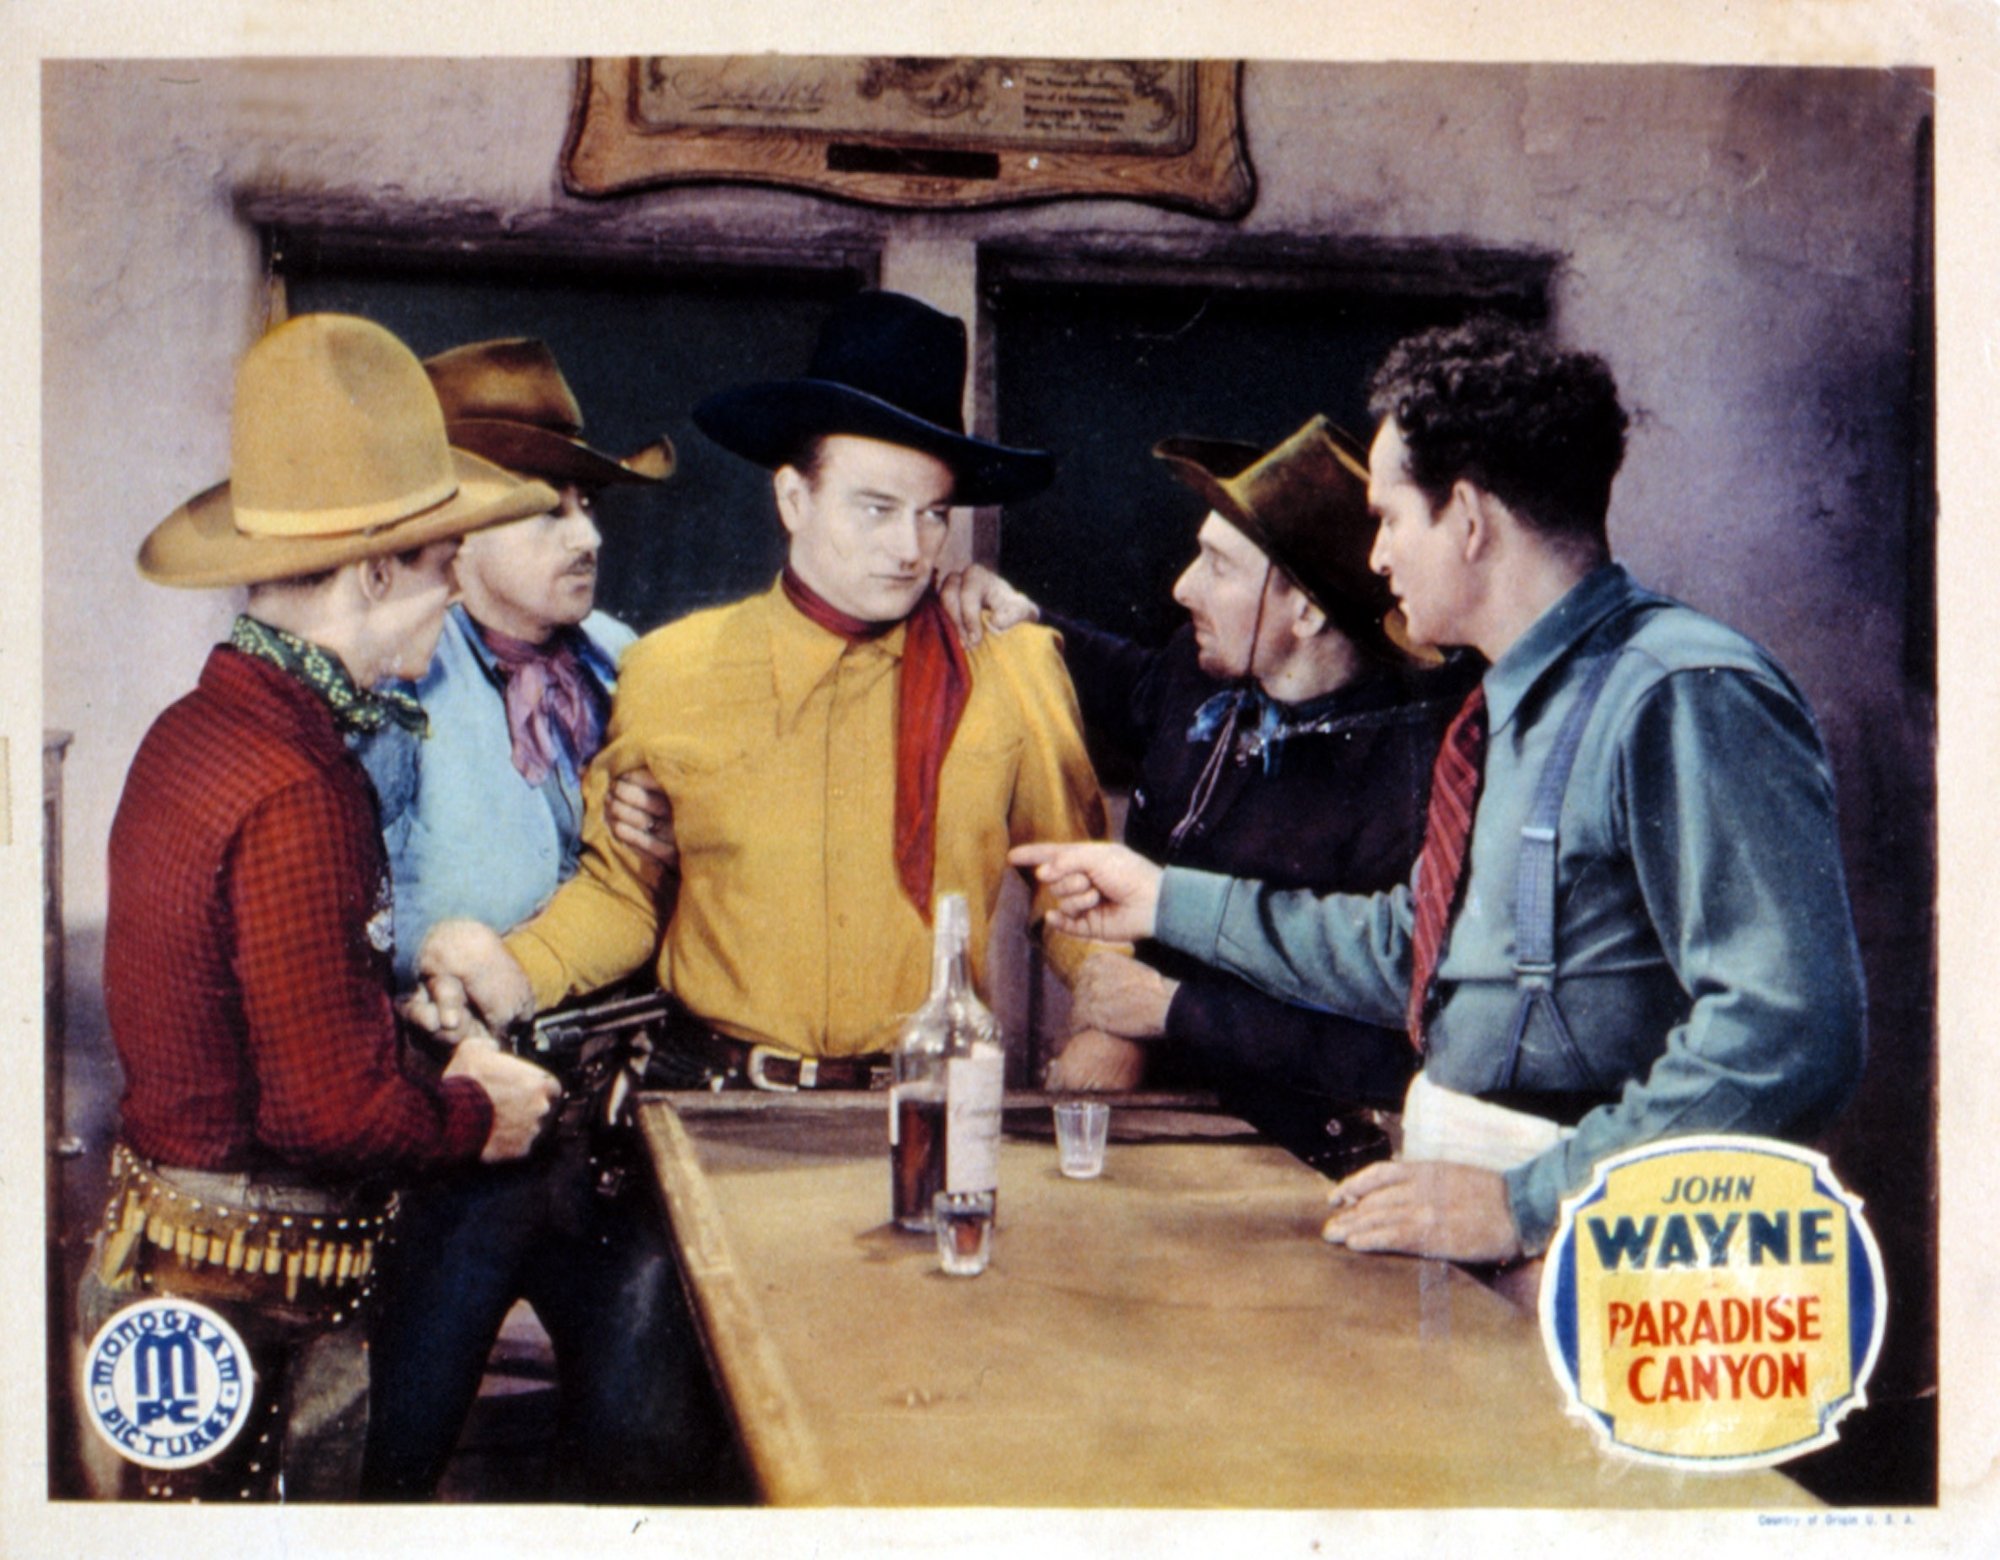 'Paradise Canyon' John Wayne and actor, stunt double Yakima Canutt. They're standing around a table wearing Western clothing looking tense.